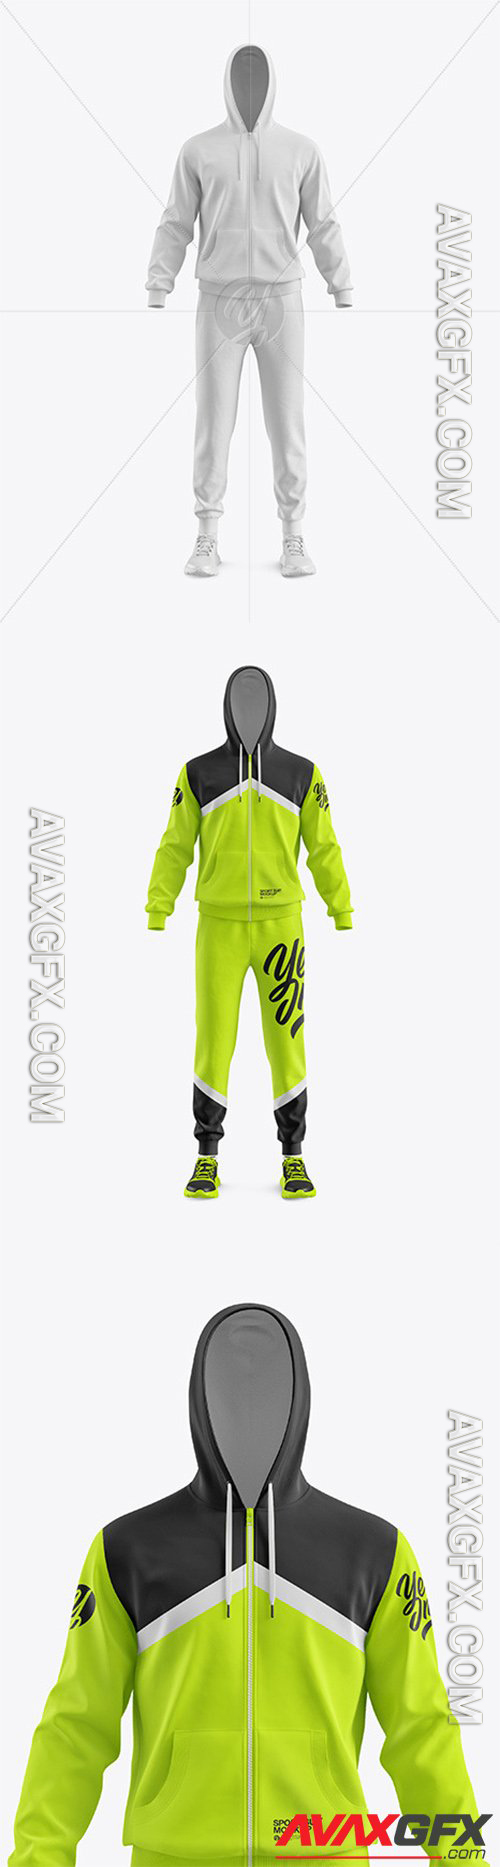 Download Men's Sport Suit Mockup - Front View 56528 » AVAXGFX - All ...